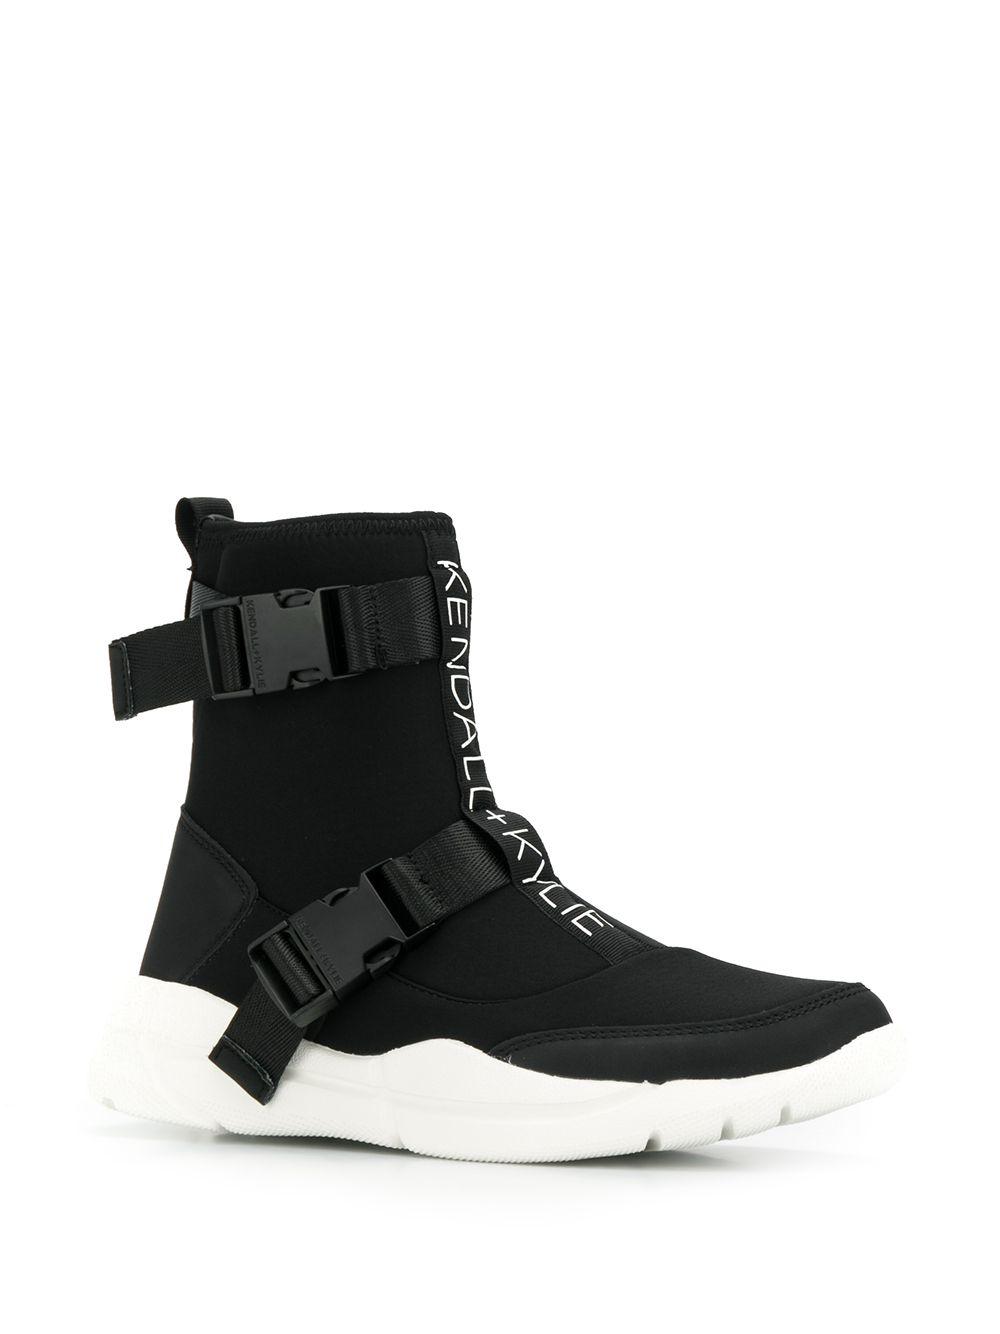 Kendall + Kylie Rubber Nemo Boots in 